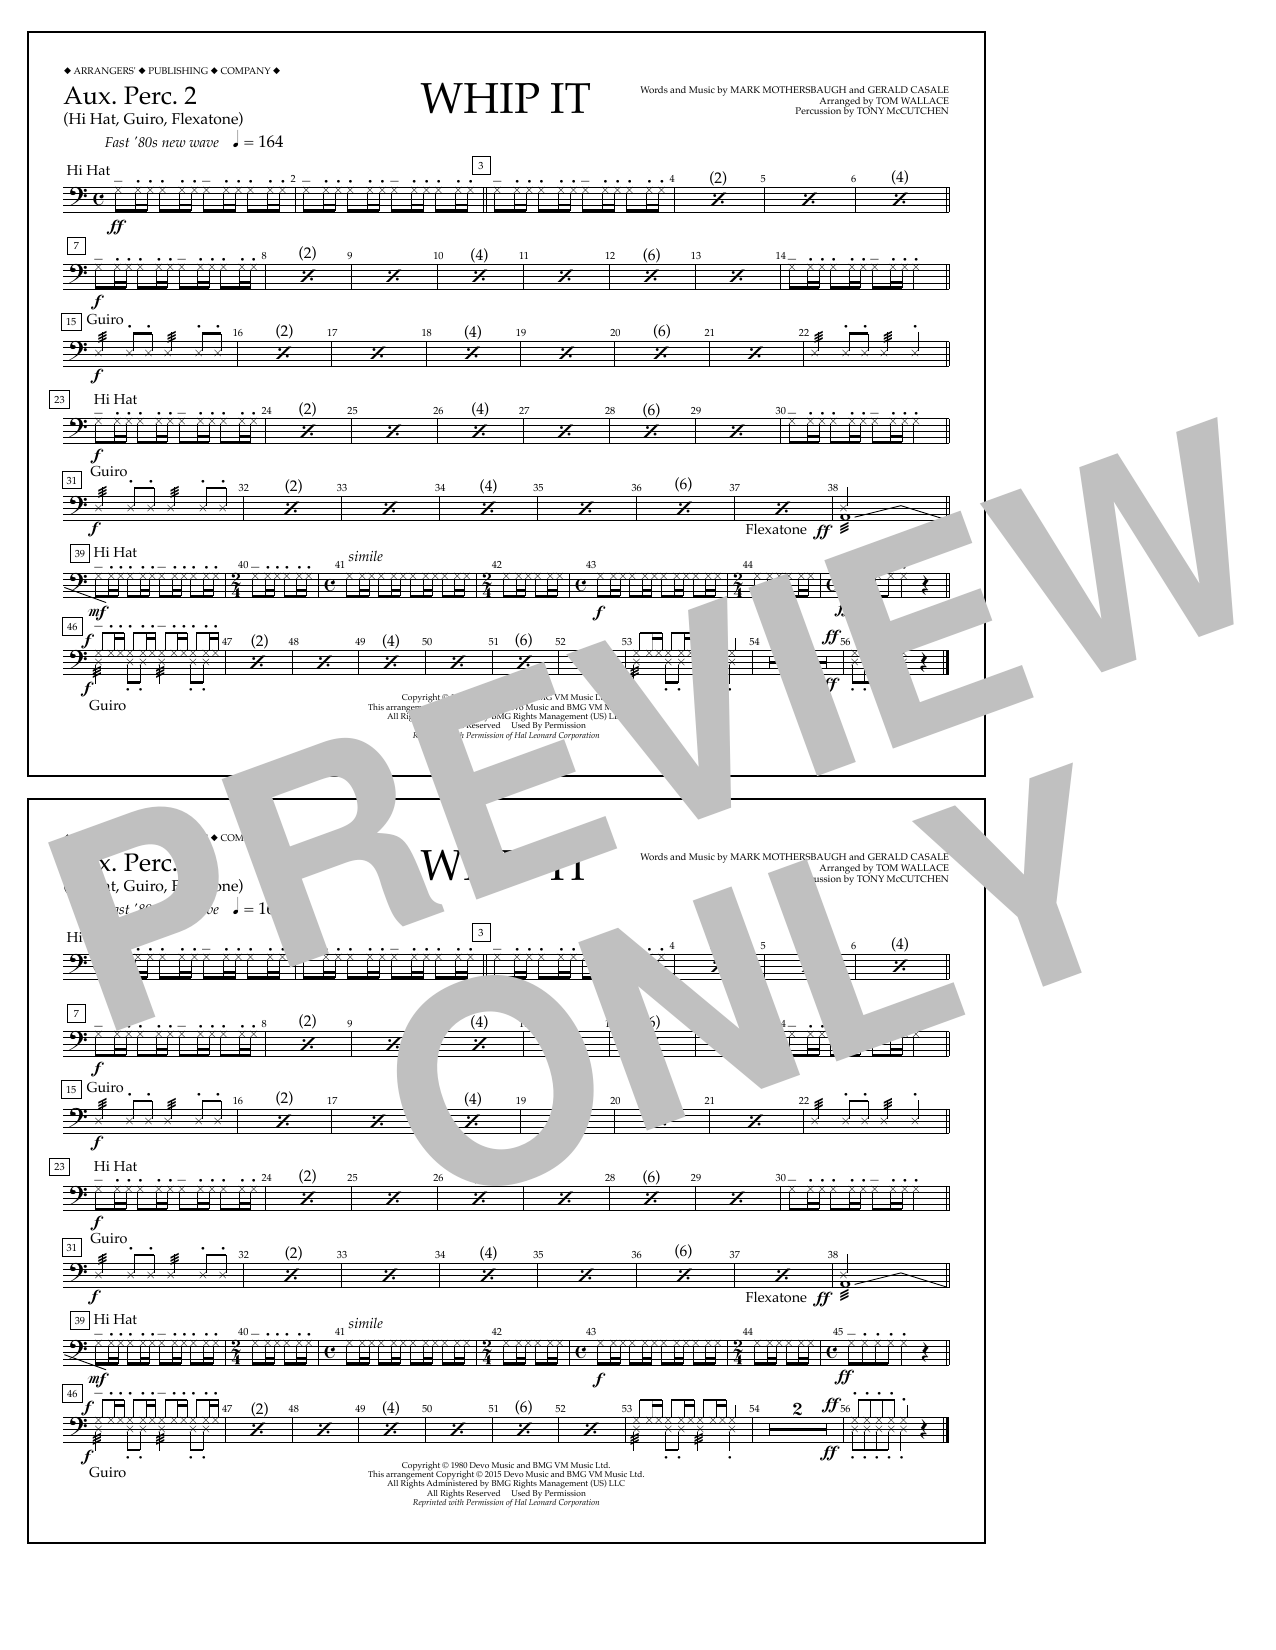 Download Tom Wallace Whip It - Aux. Perc. 2 Sheet Music